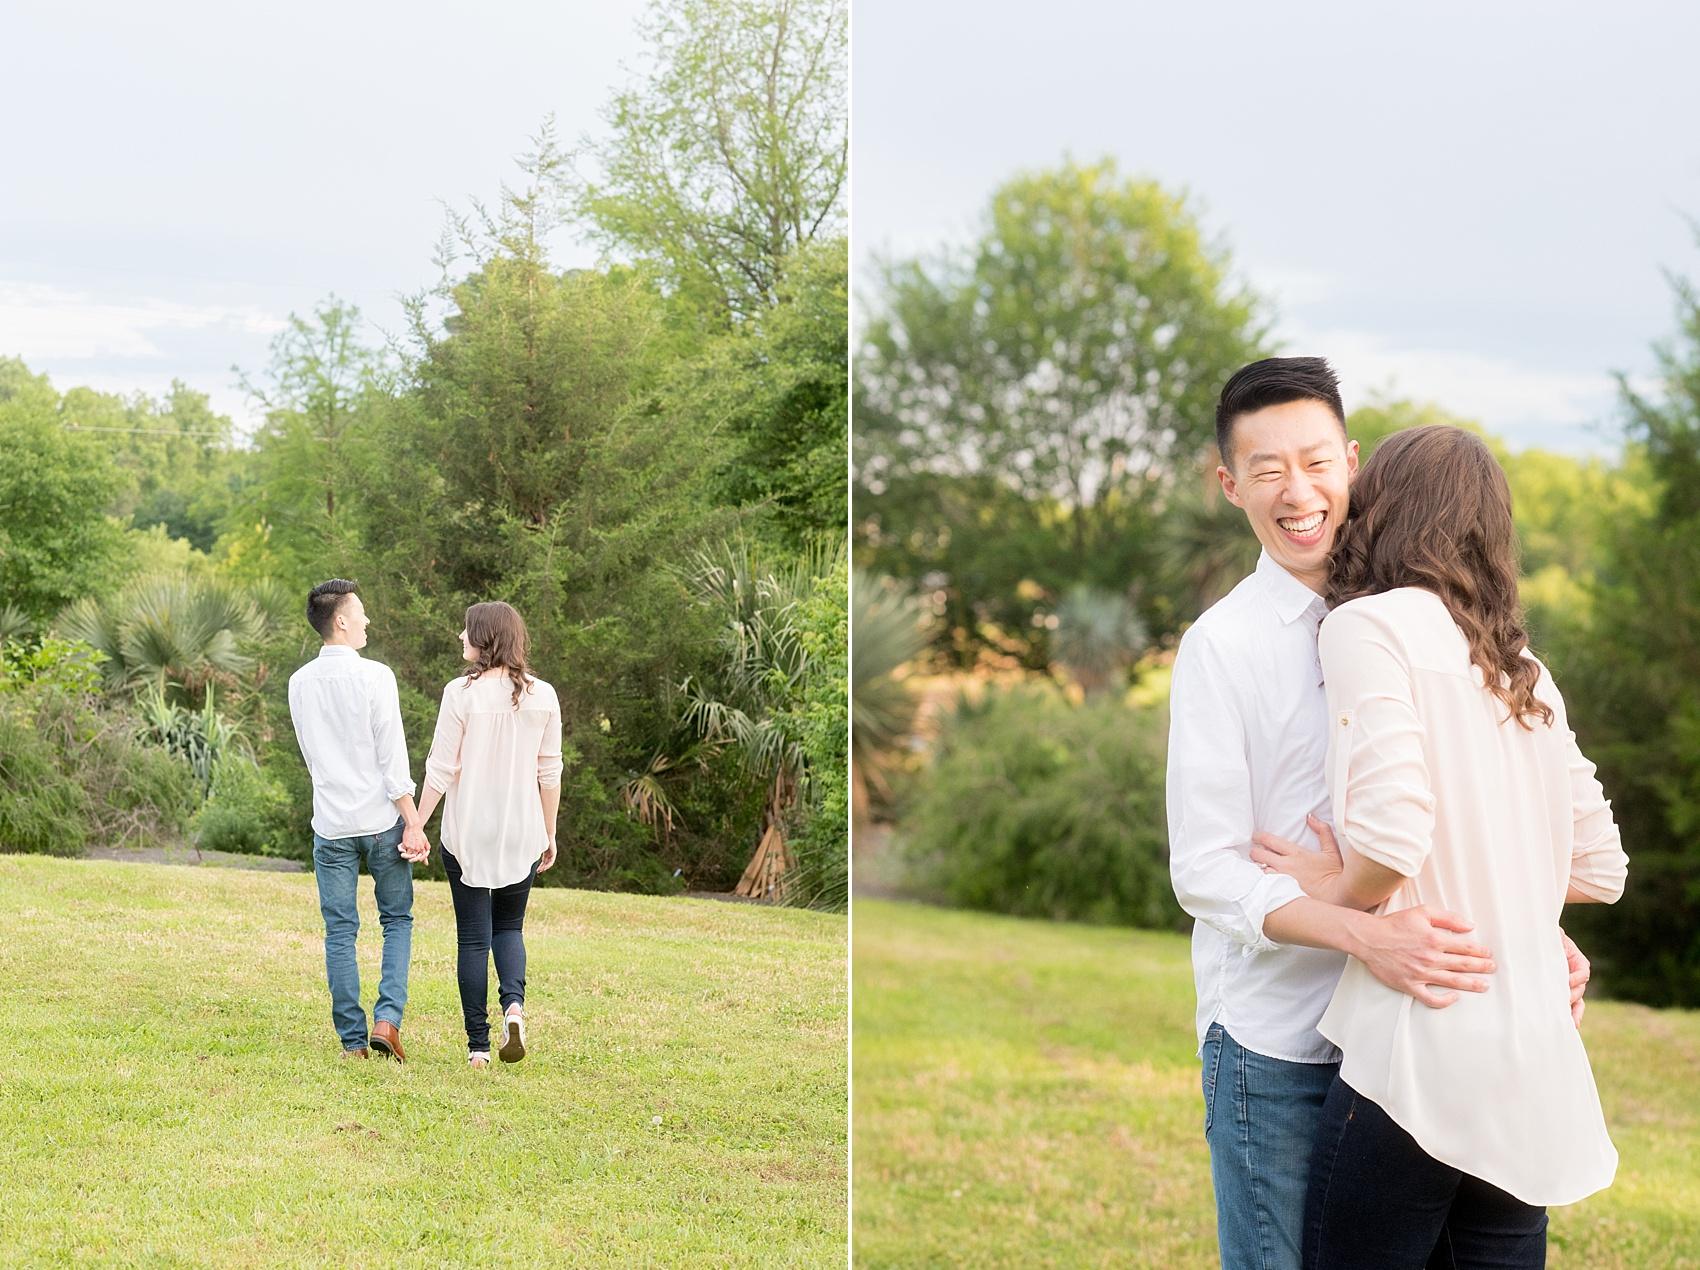 Raleigh engagement photos by Mikkel Paige Photography at JC Raulston Arboretum at NC State.